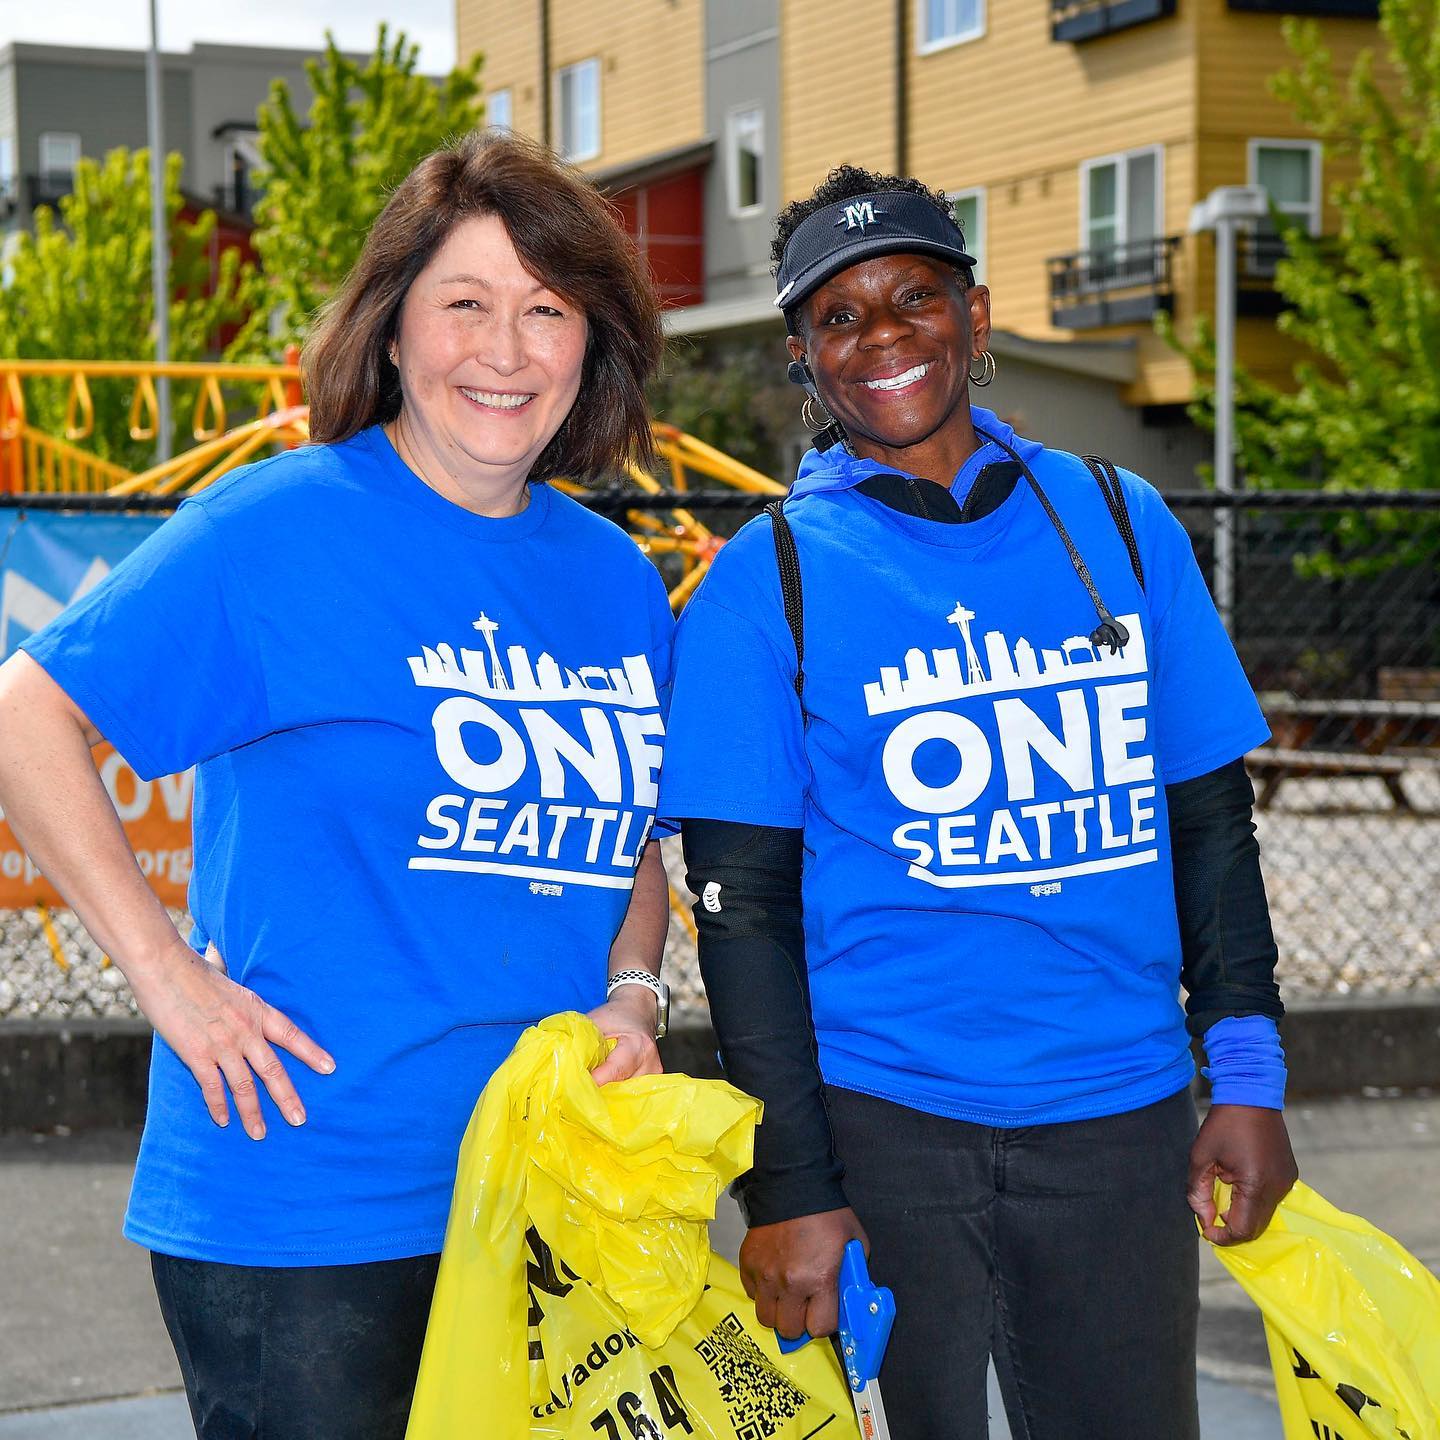 We had an awesome time at the Rainier Vista Boys & Girls Club for #OneSeattle #D...